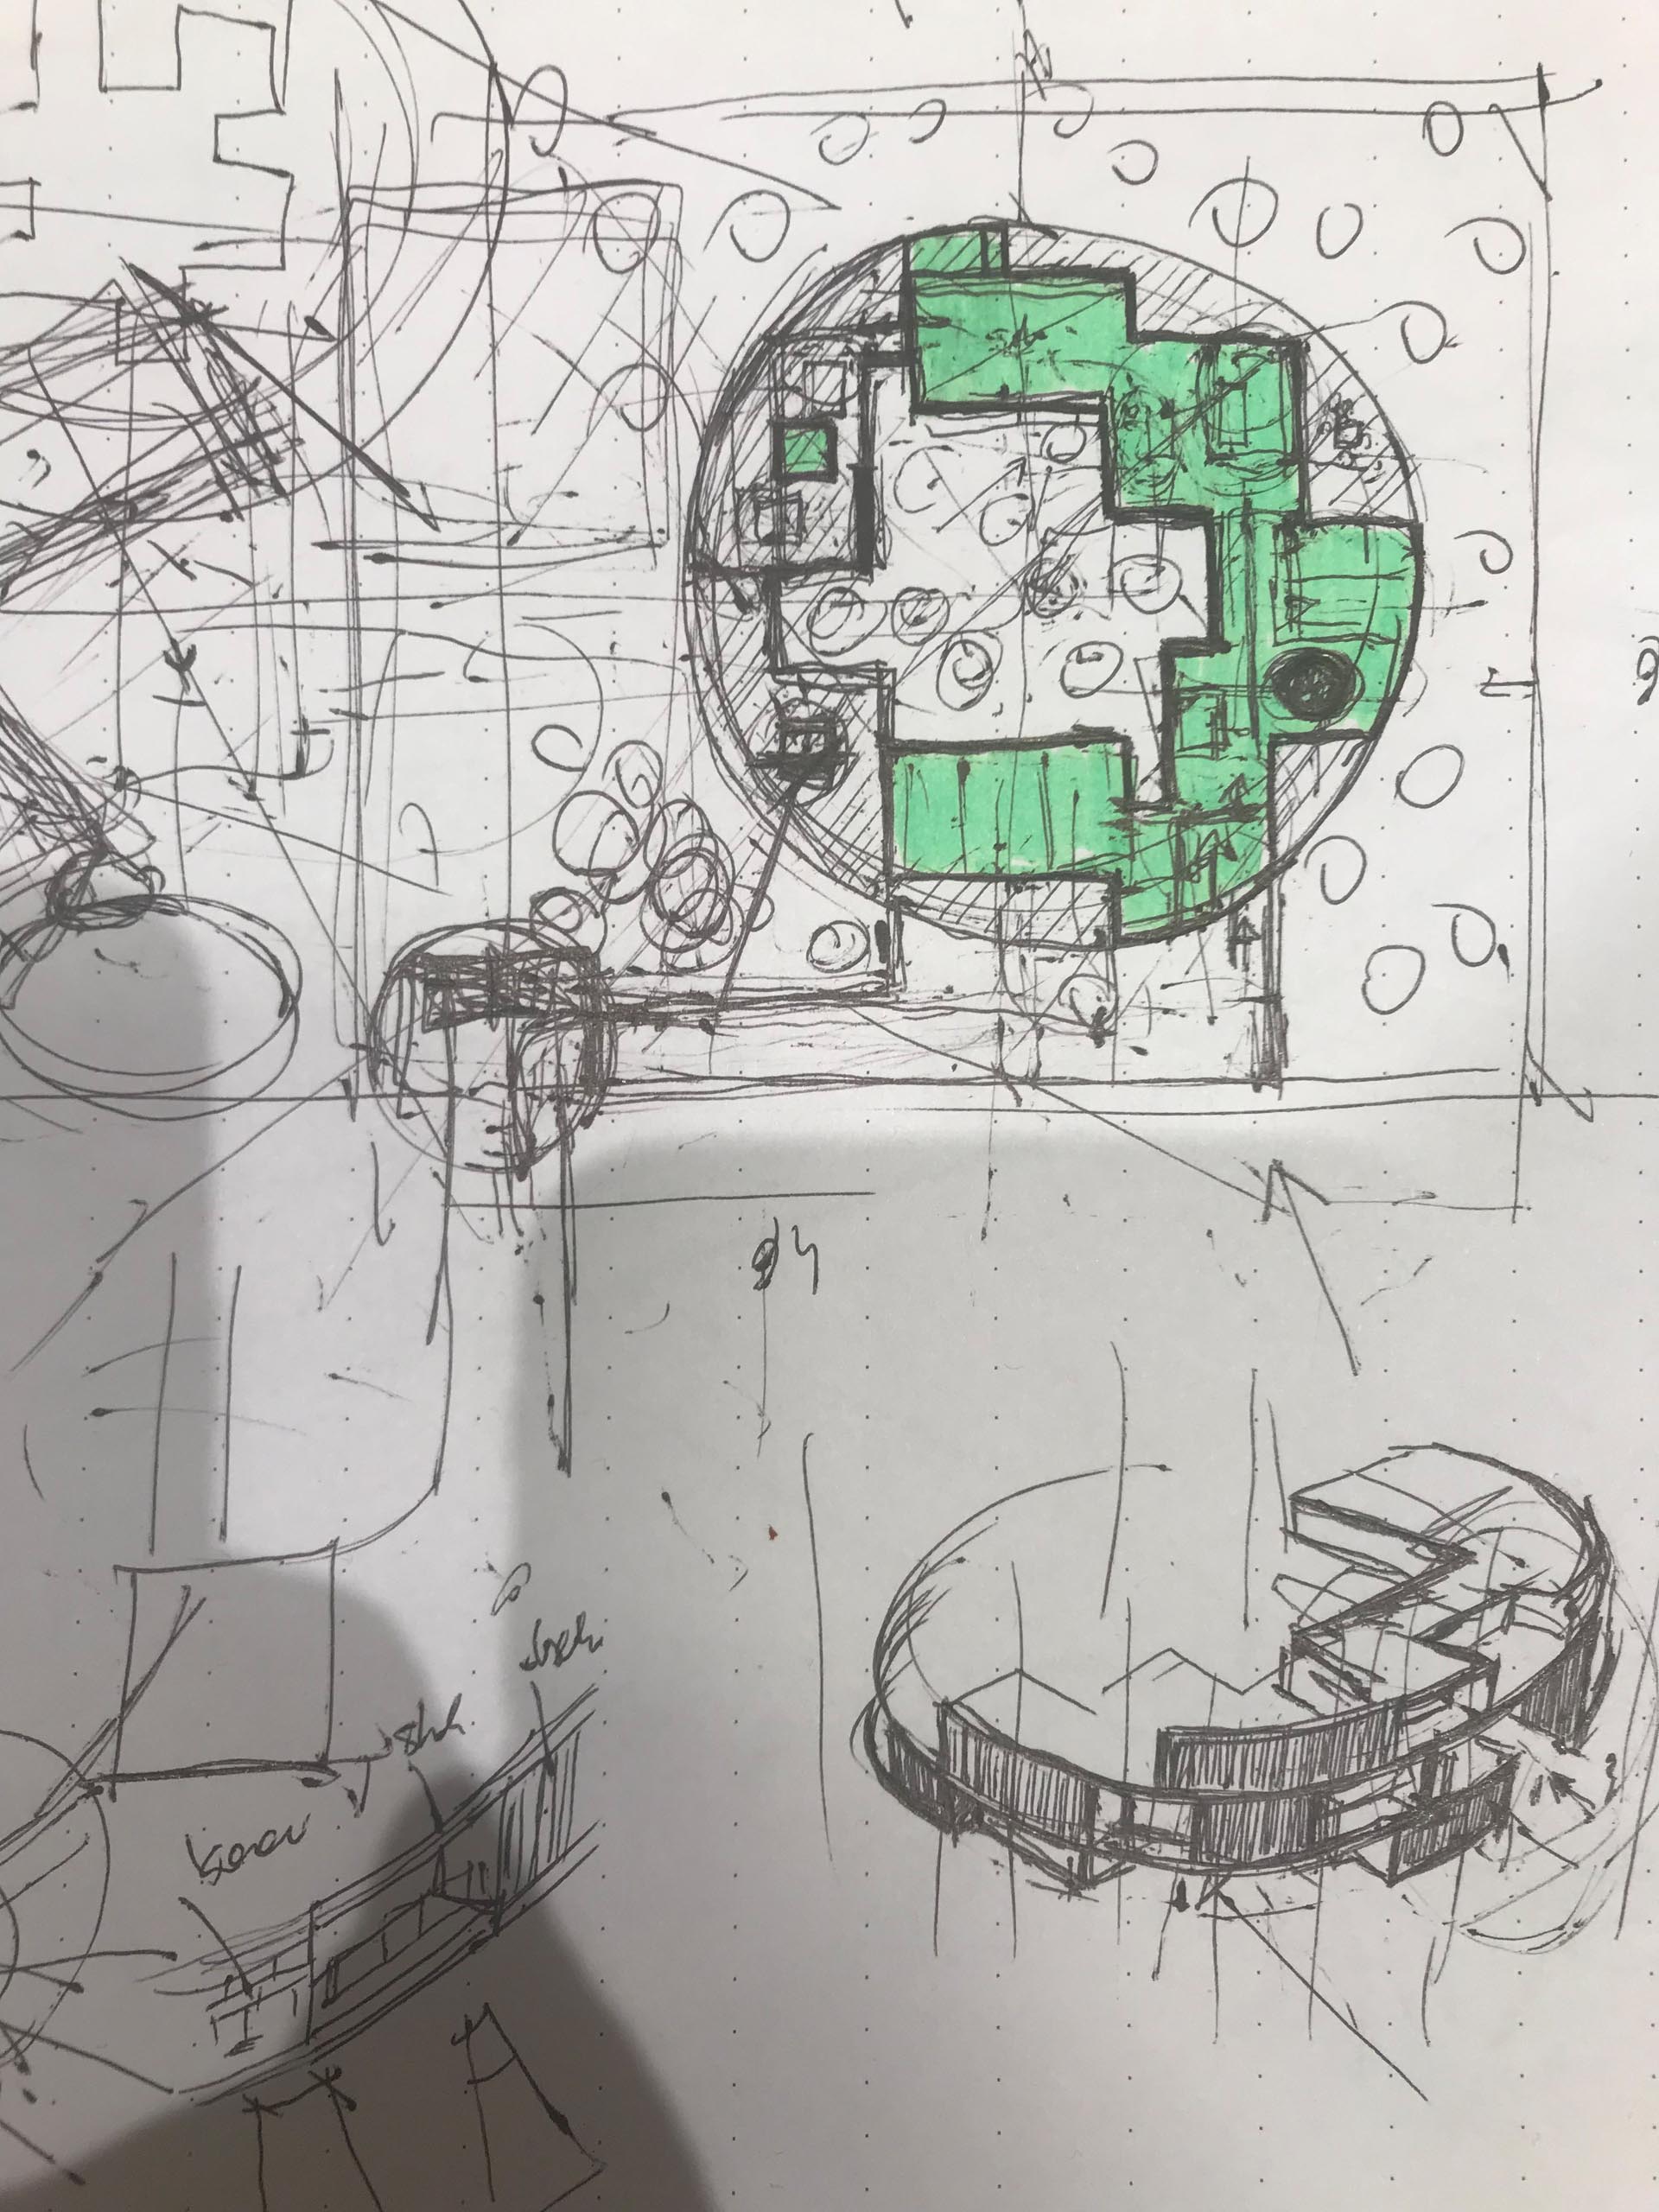 The architect's sketch of a circular home.